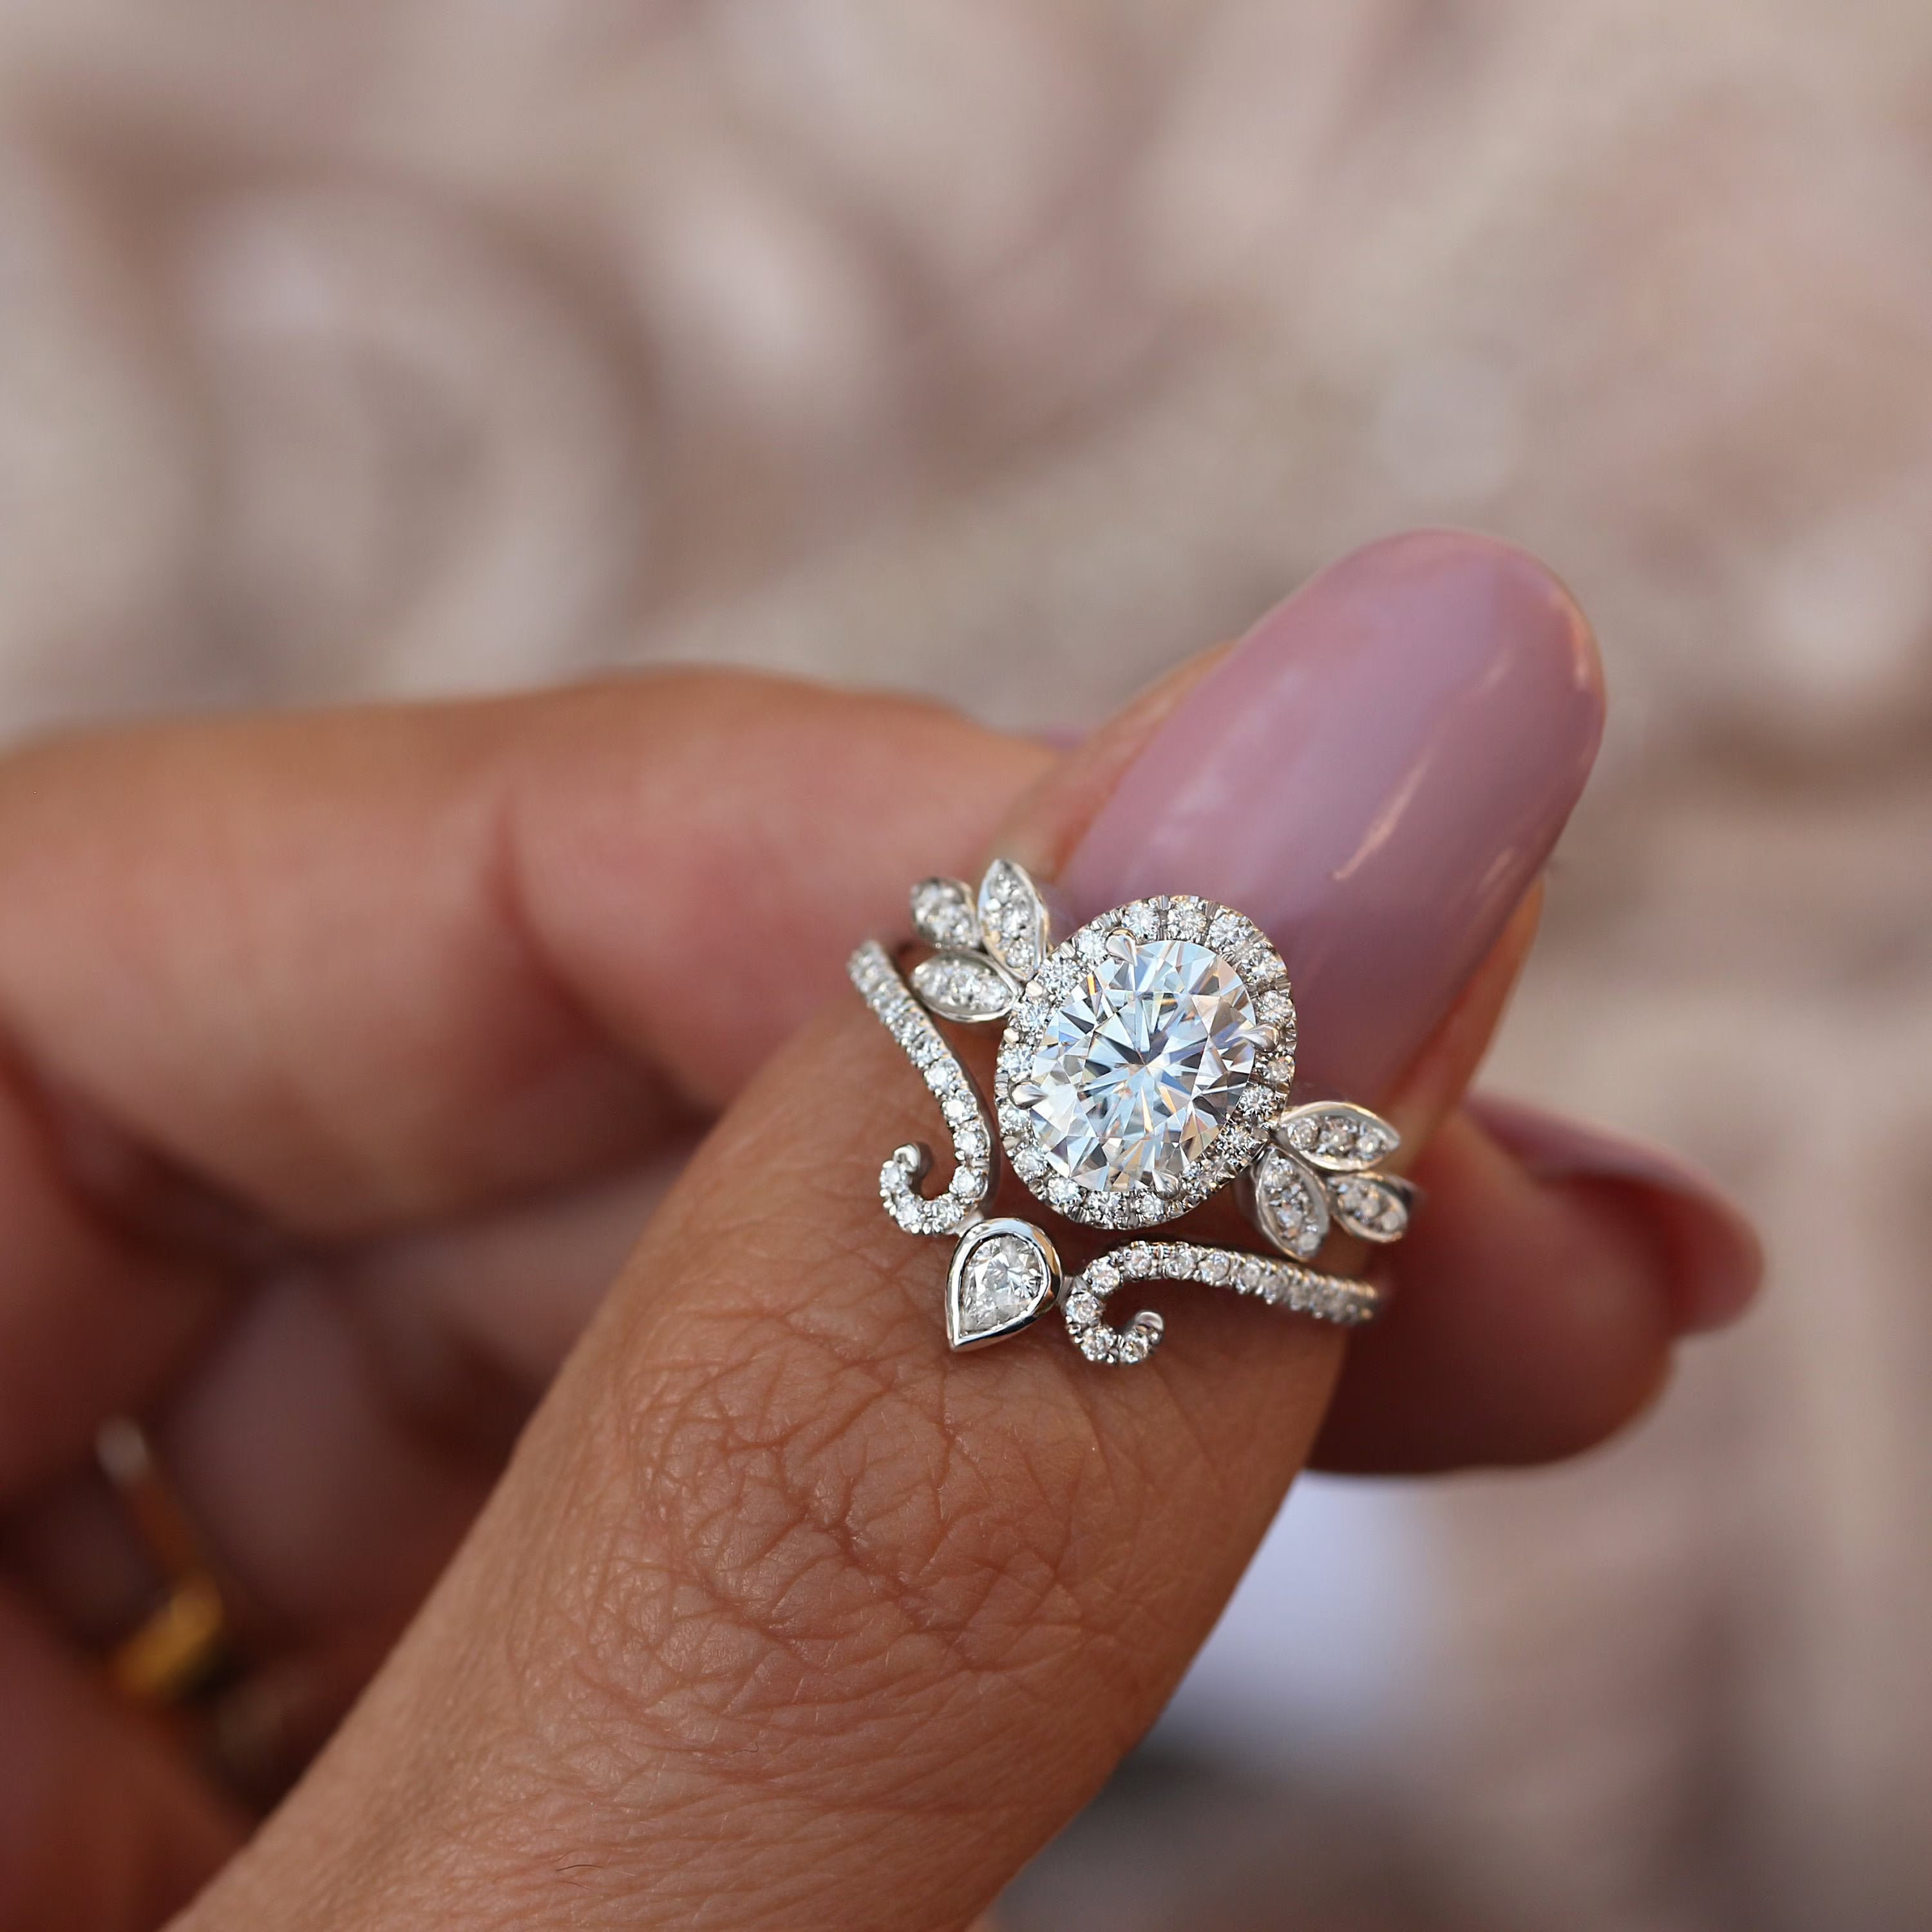 Finding a Unique Engagement Ring in Toronto